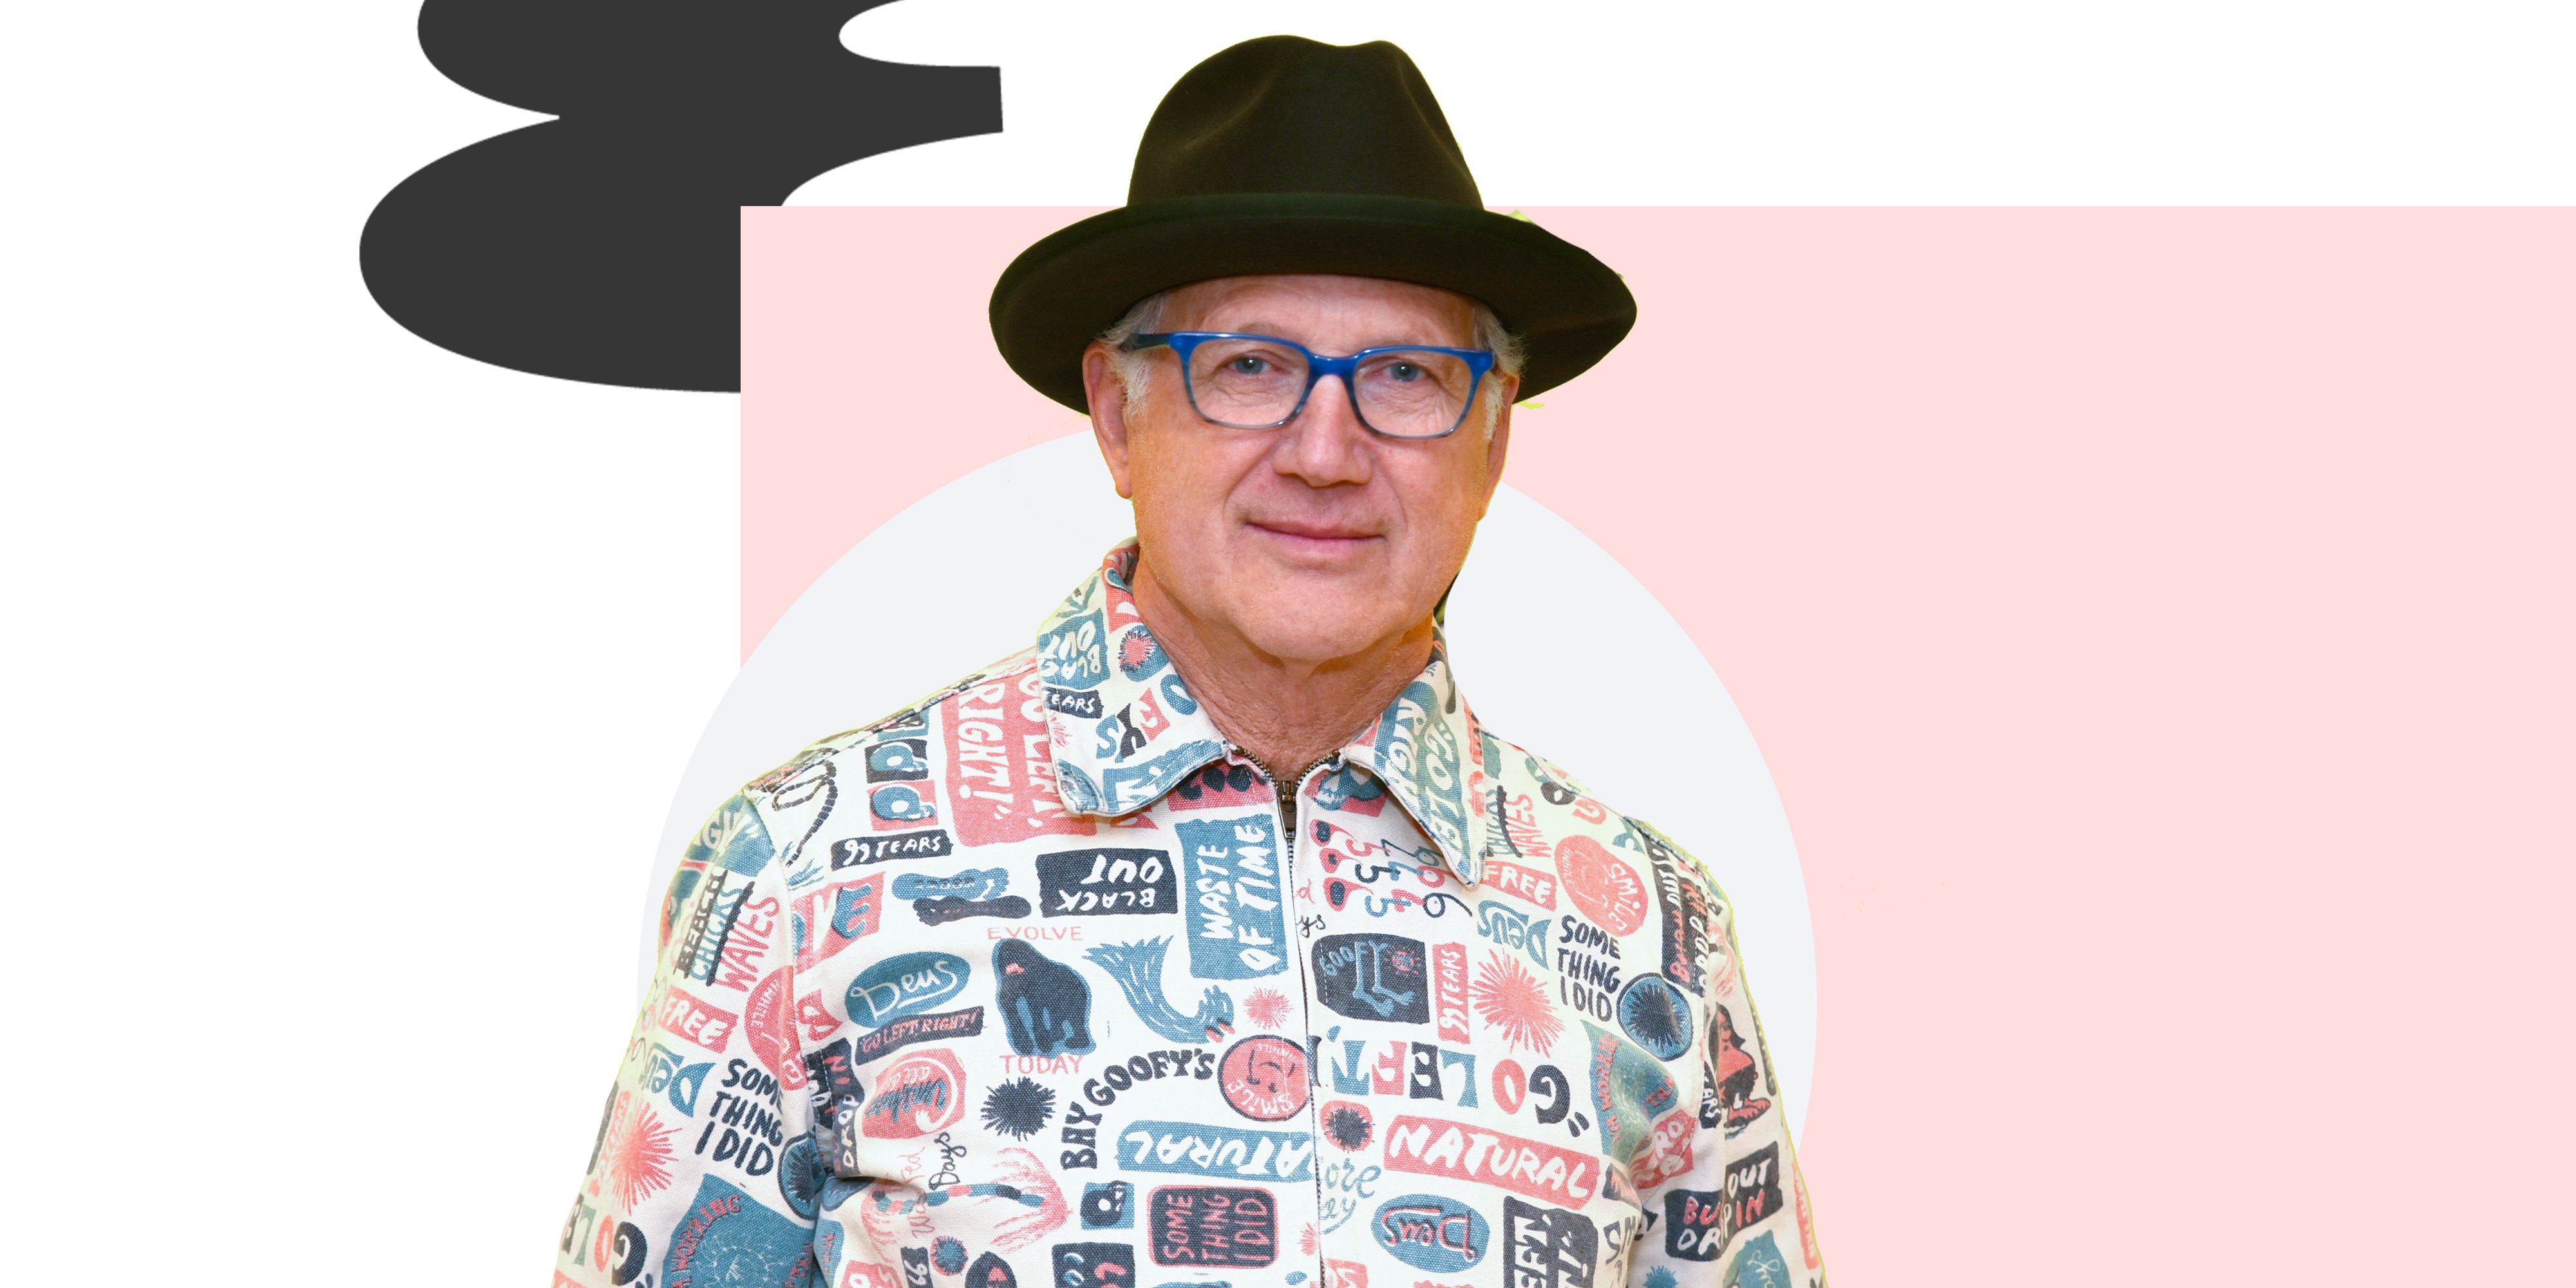 Tinker Hatfield Interview on Sneakers, NFTs, Design, and Michelob Ultra